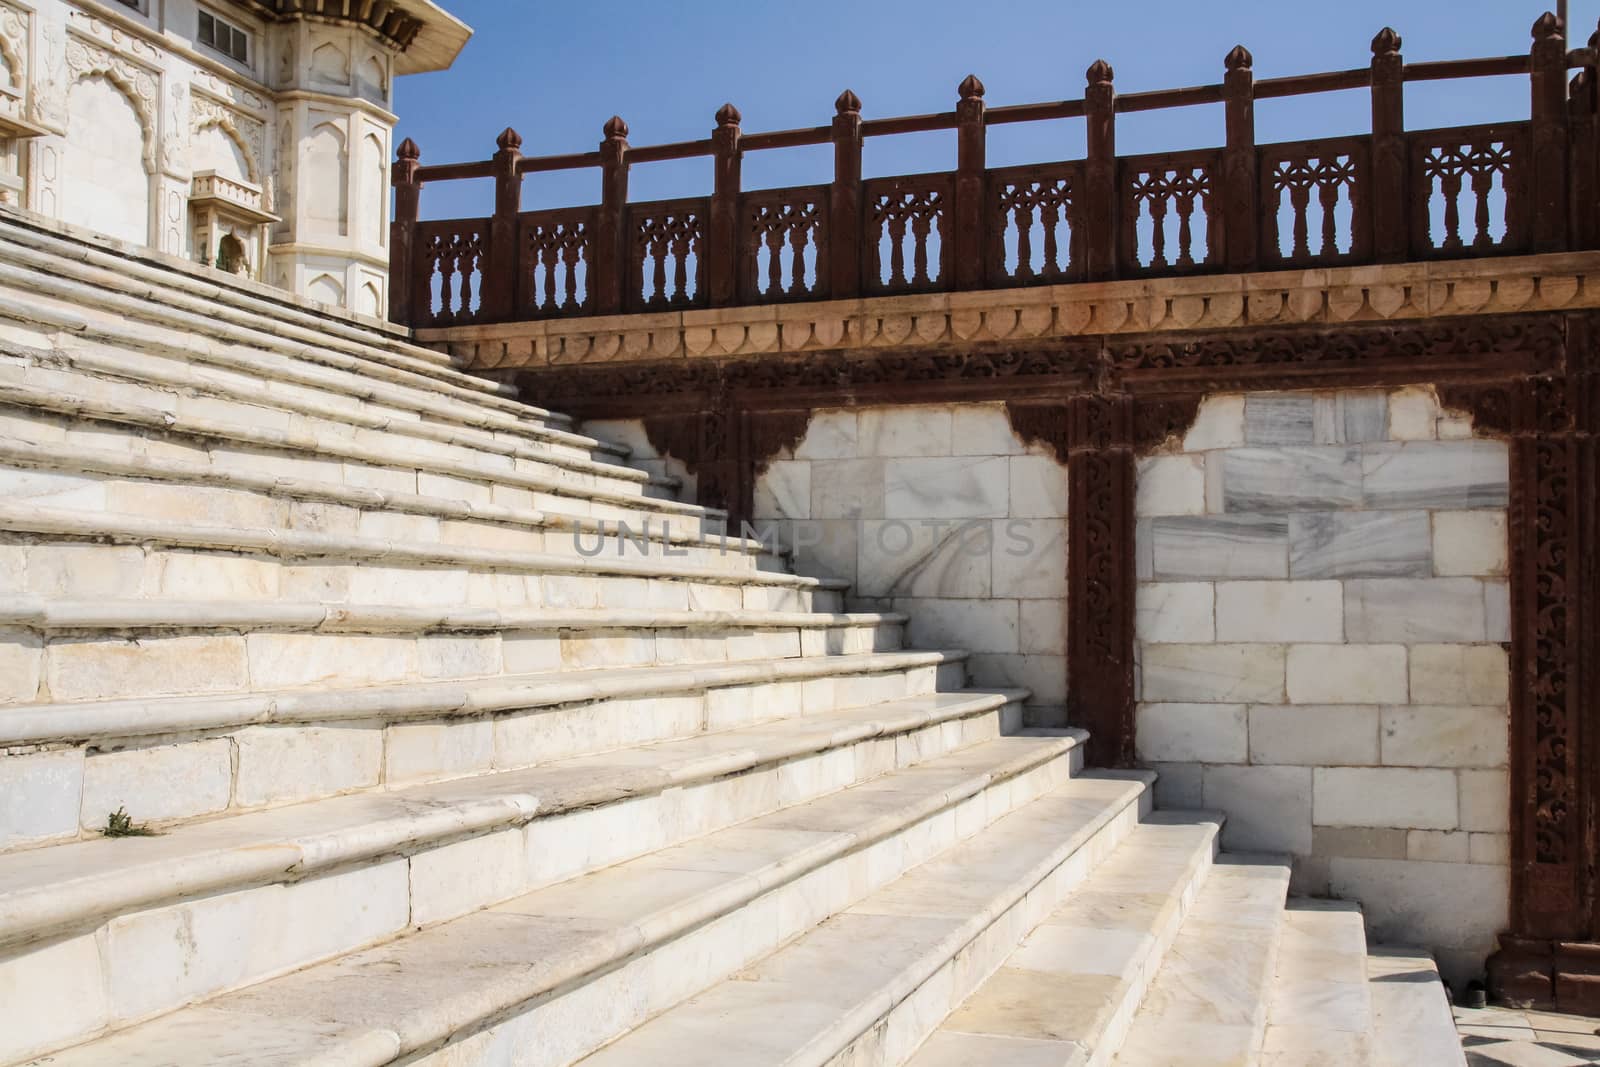 Jaswant Thada in Jodhpur Rajasthan India .White Marble Construction with contrasting use of red sandstone for pillars and balustrade carvings. marble stairway with red stone balustrade in morning sunlight against clear blue sky with main centopah partially visible.